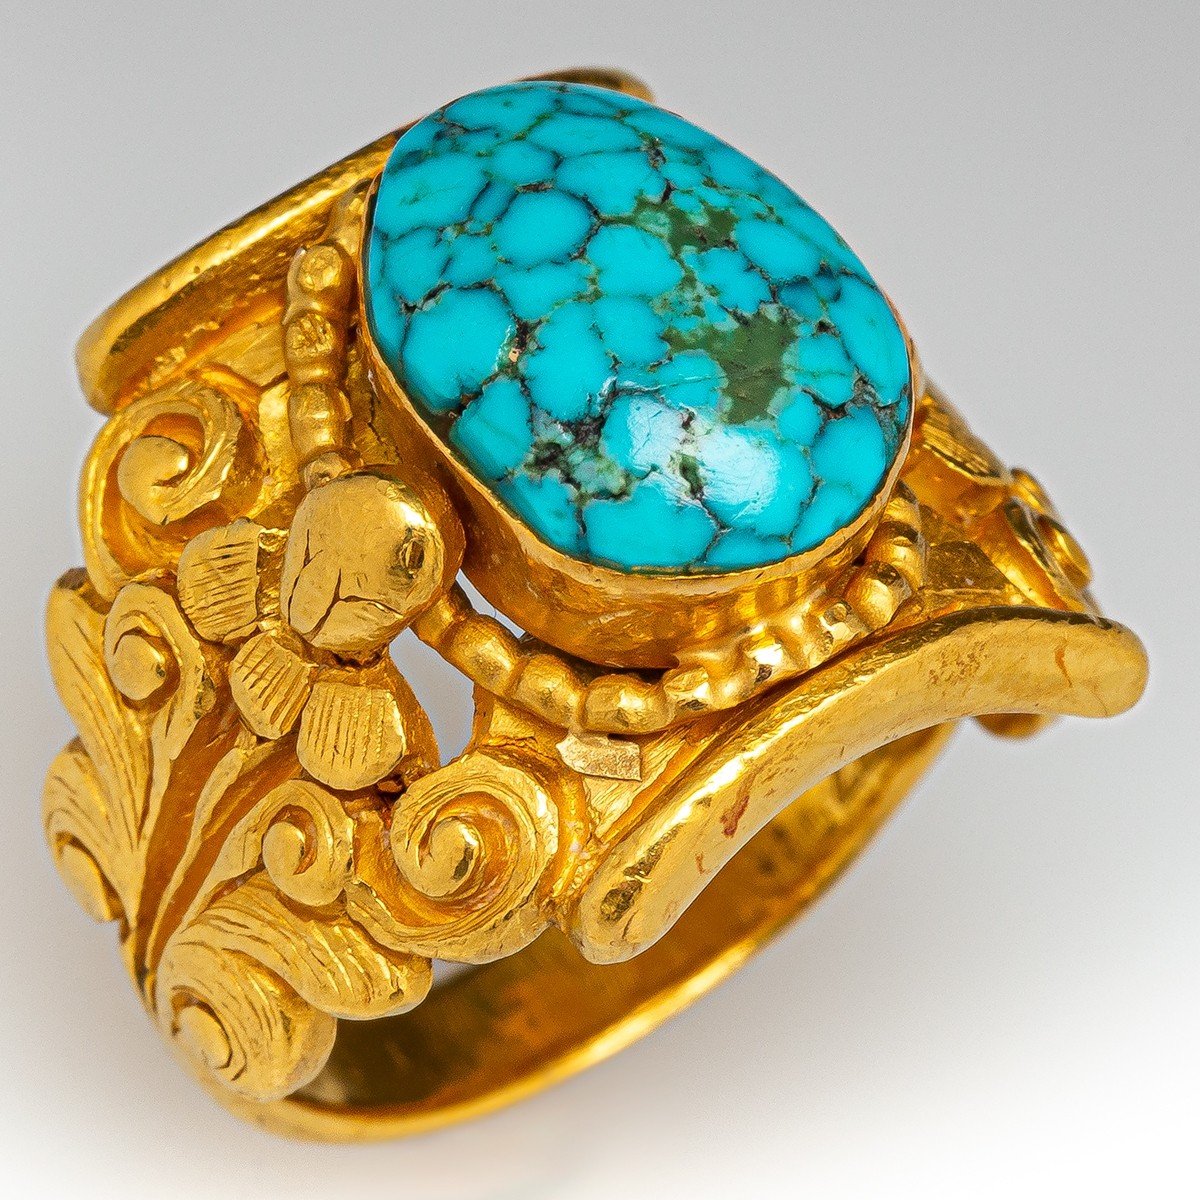 Three Stories Jewelry Wish on a Star Turquoise Ring in 14k Yellow Gold |  Audry Rose